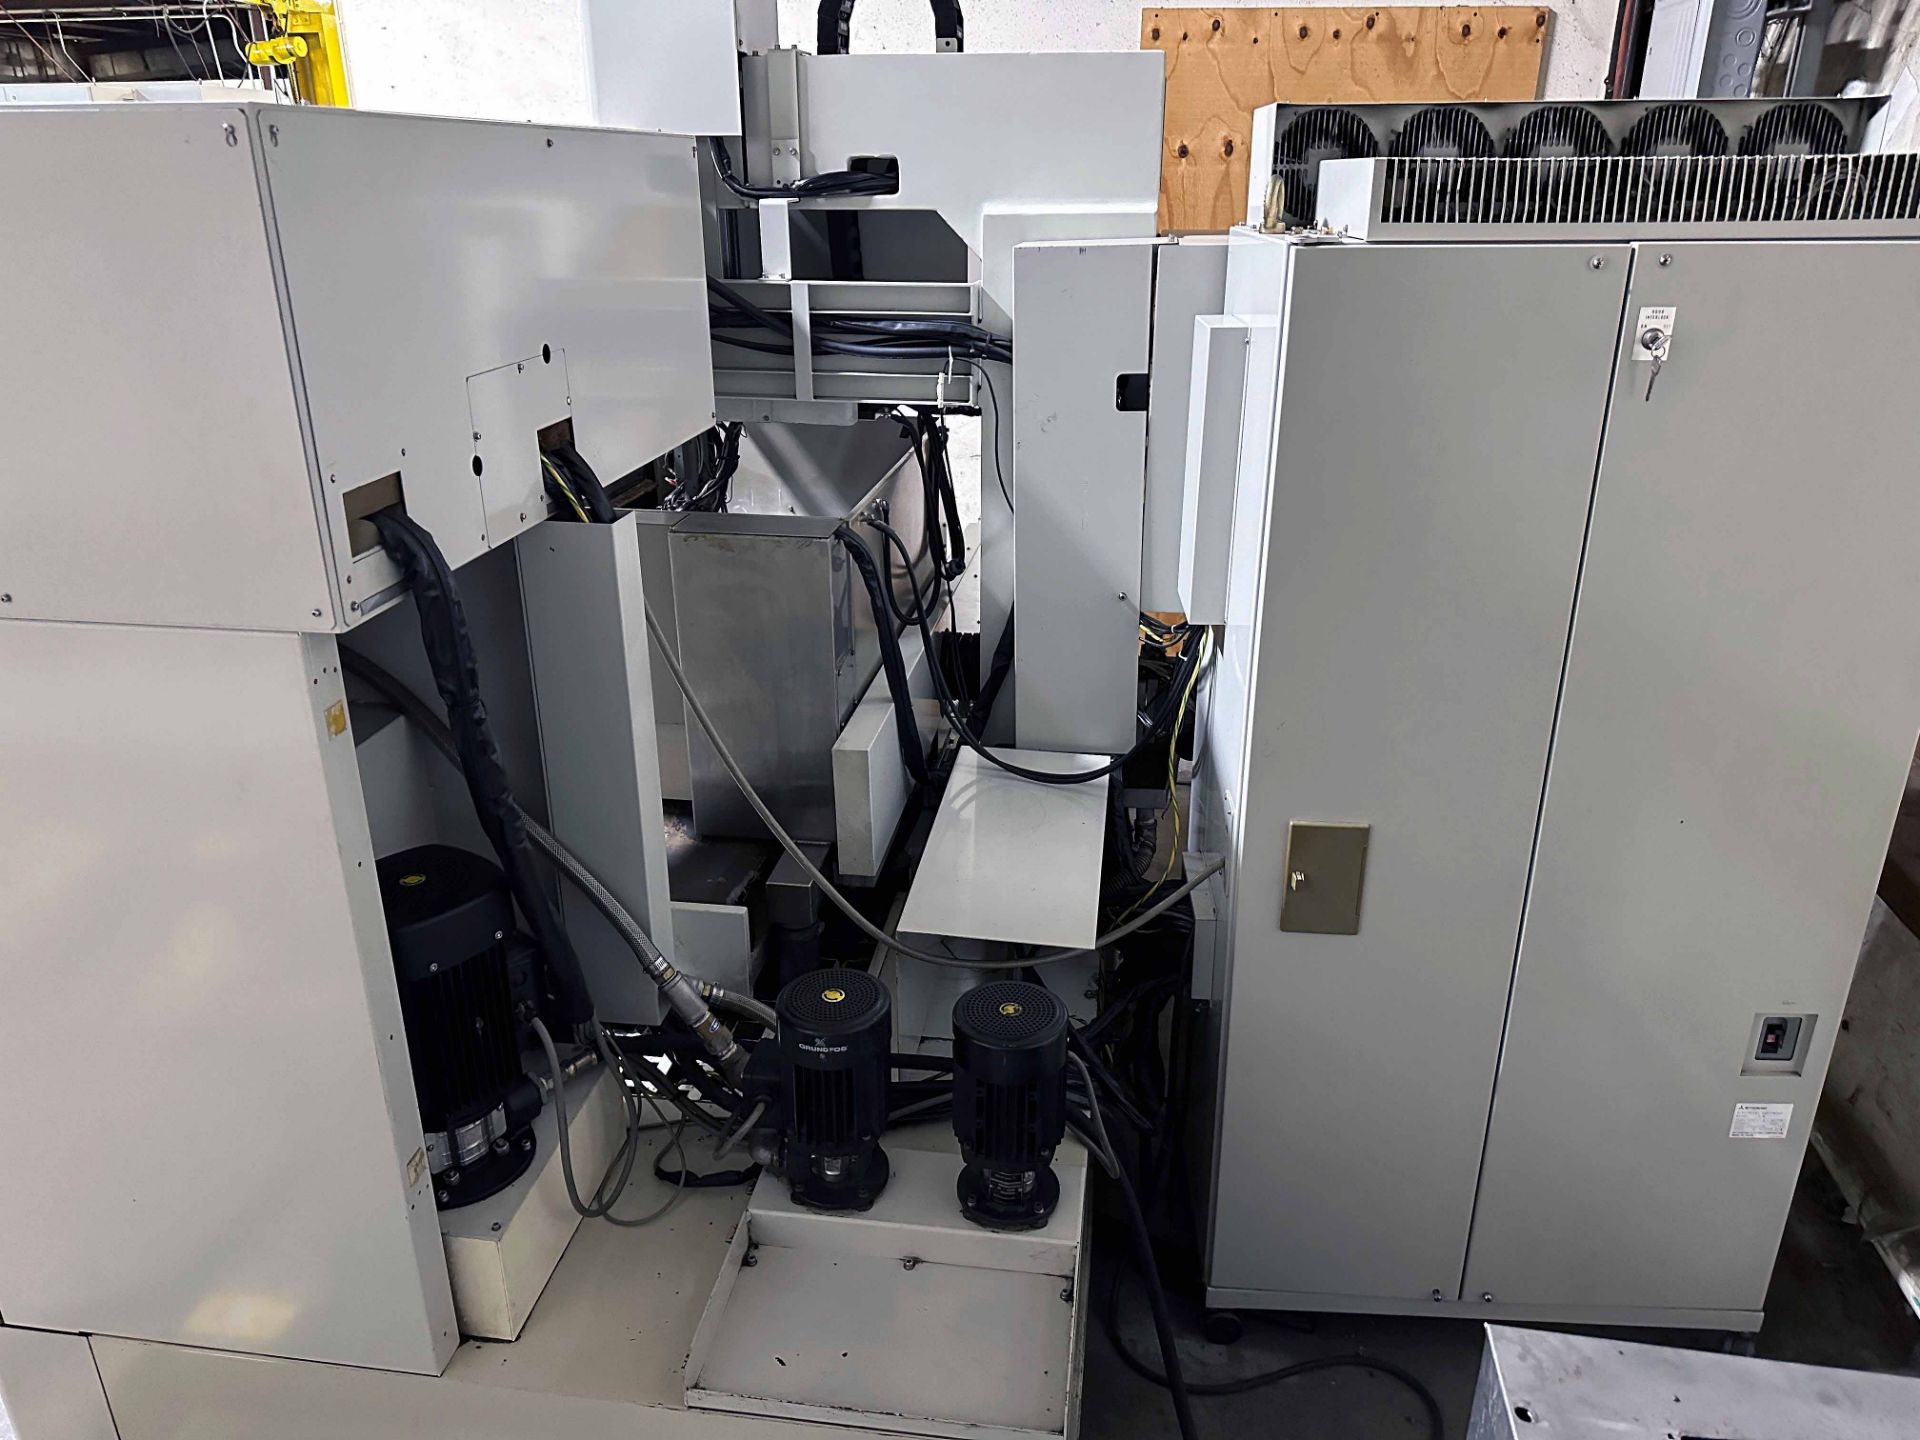 WIRE EDM MACHINE, MITSUBISHI MDL. SX-20, 19.7” X axis, 13.8” Y axis, 10.6” Z-axis travels, 2,200-lb. - Image 5 of 7